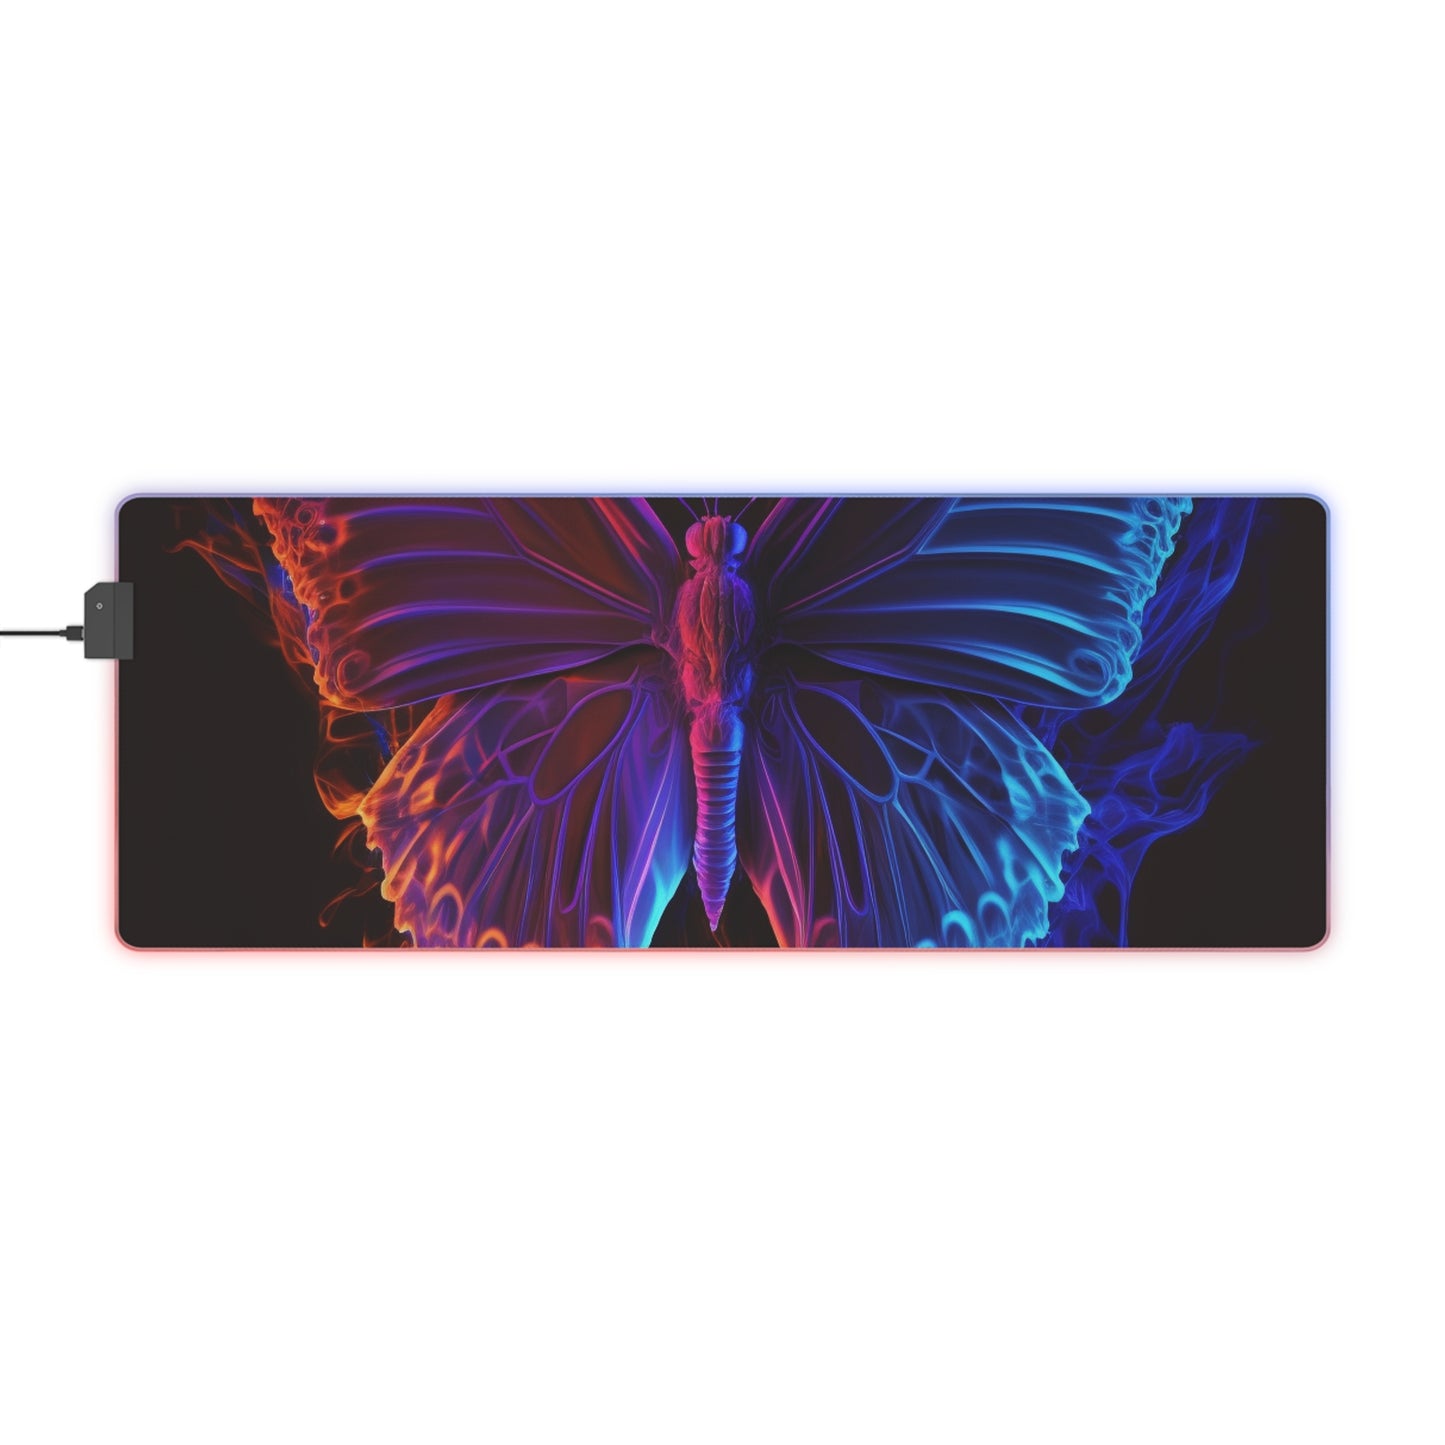 LED Gaming Mouse Pad Thermal Butterfly 1